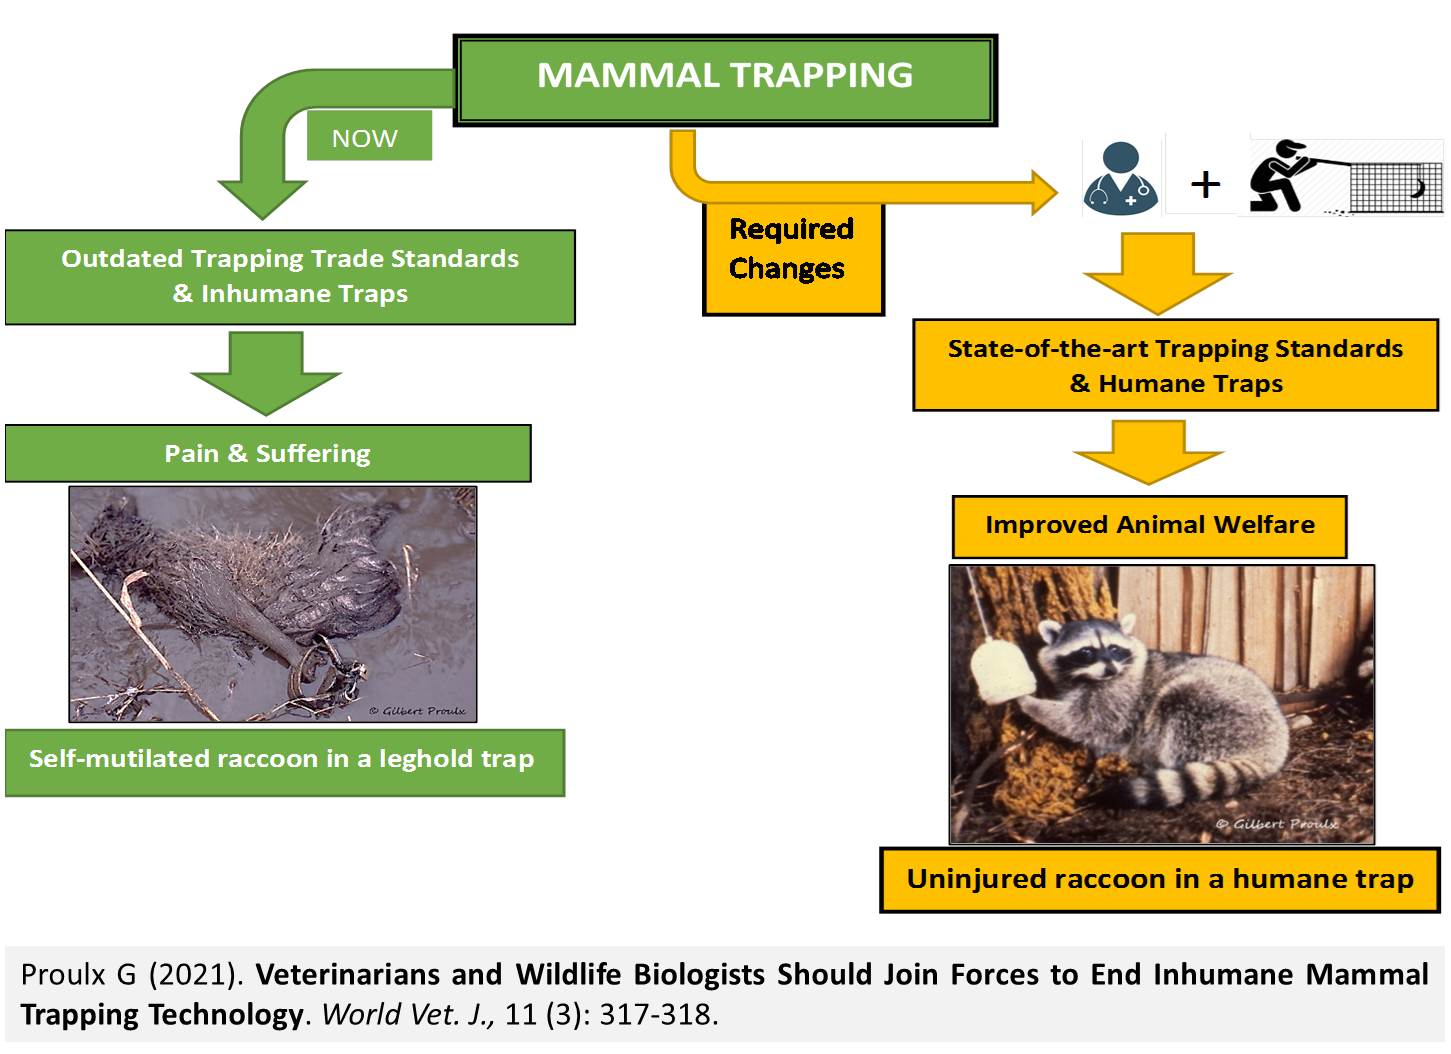 https://wvj.science-line.com/images/stories/2021/48-End_Inhumane_Mammal_Trapping_Technology.jpg